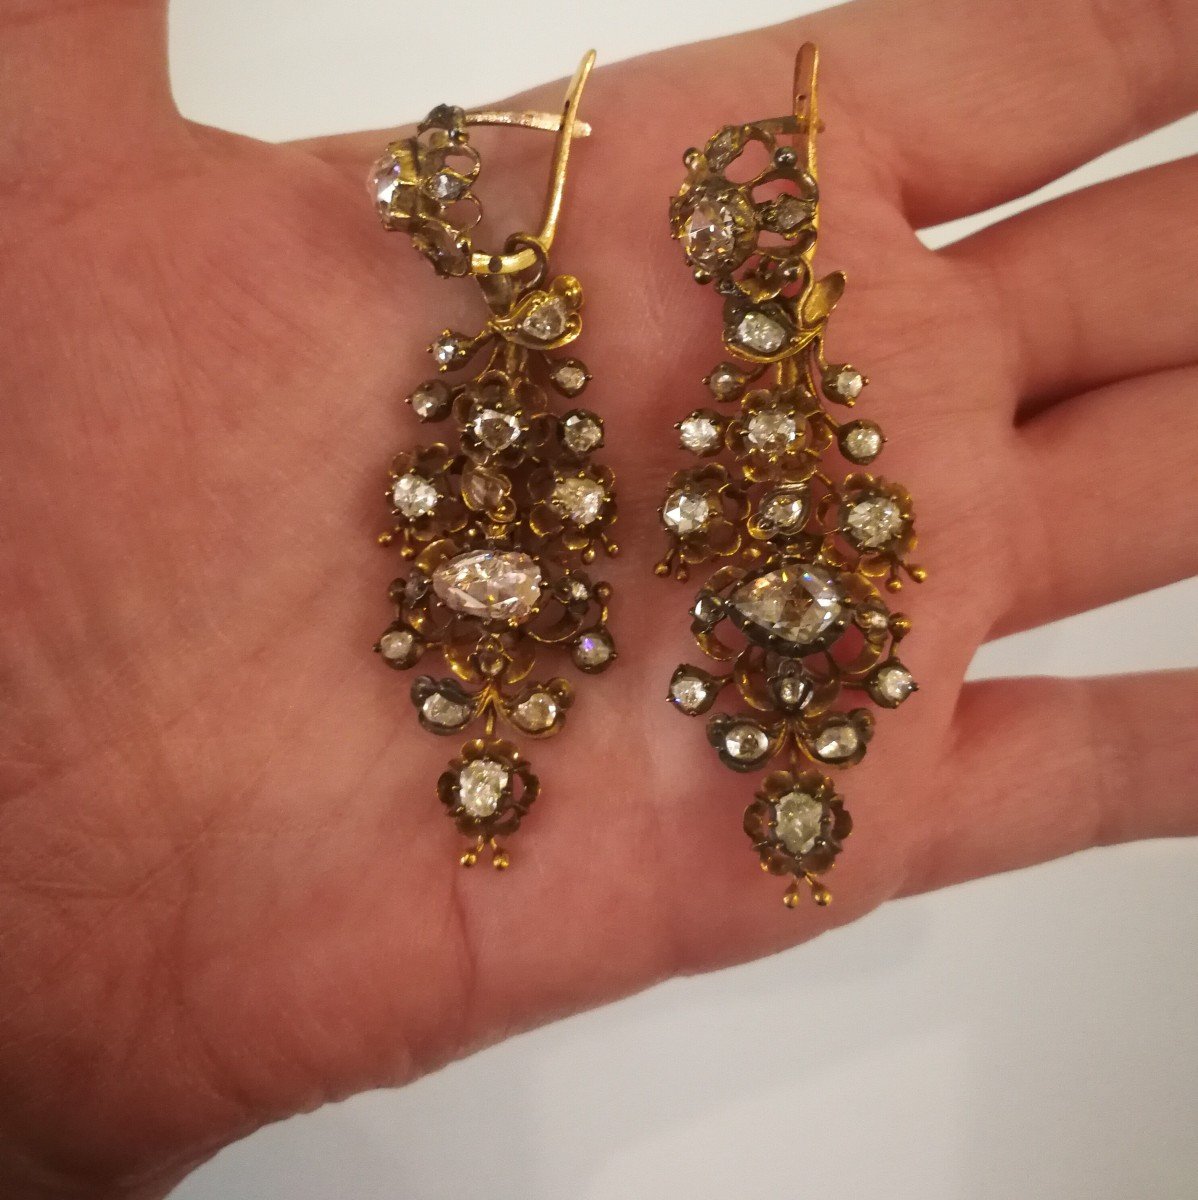 Spanish Drop Earrings In Gold And Diamonds, Mid-19th Century.-photo-4